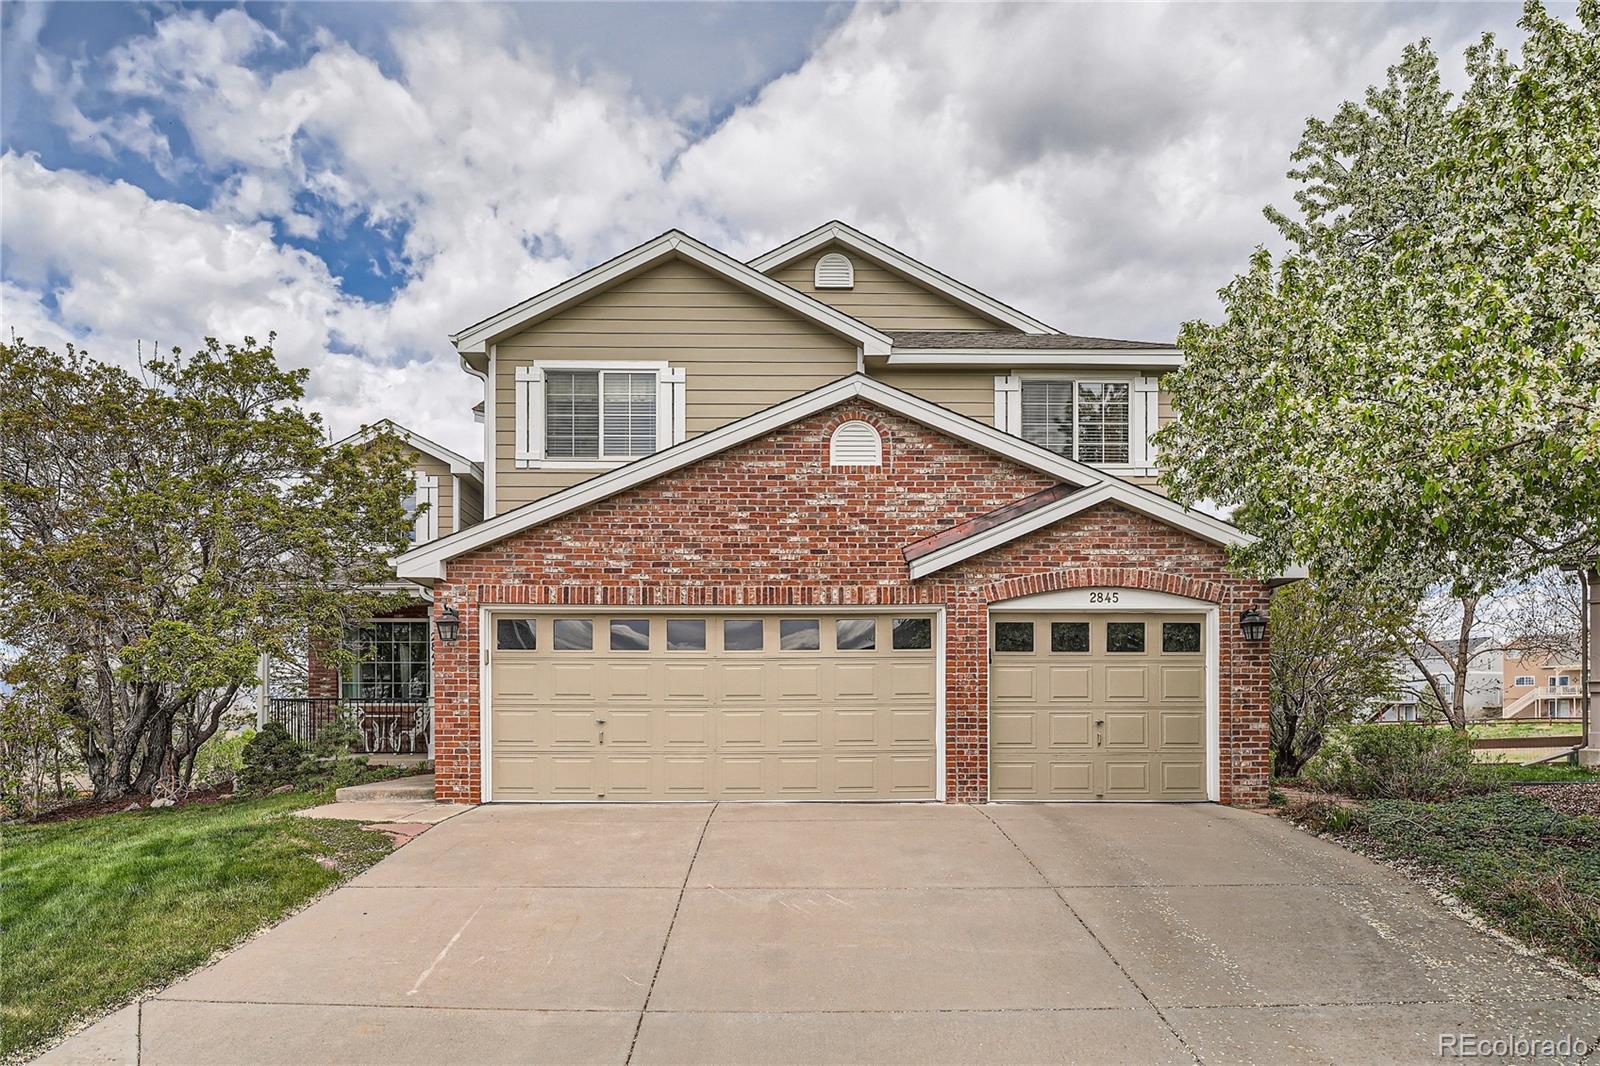 Report Image for 2845  Spring Hill Peak ,Highlands Ranch, Colorado